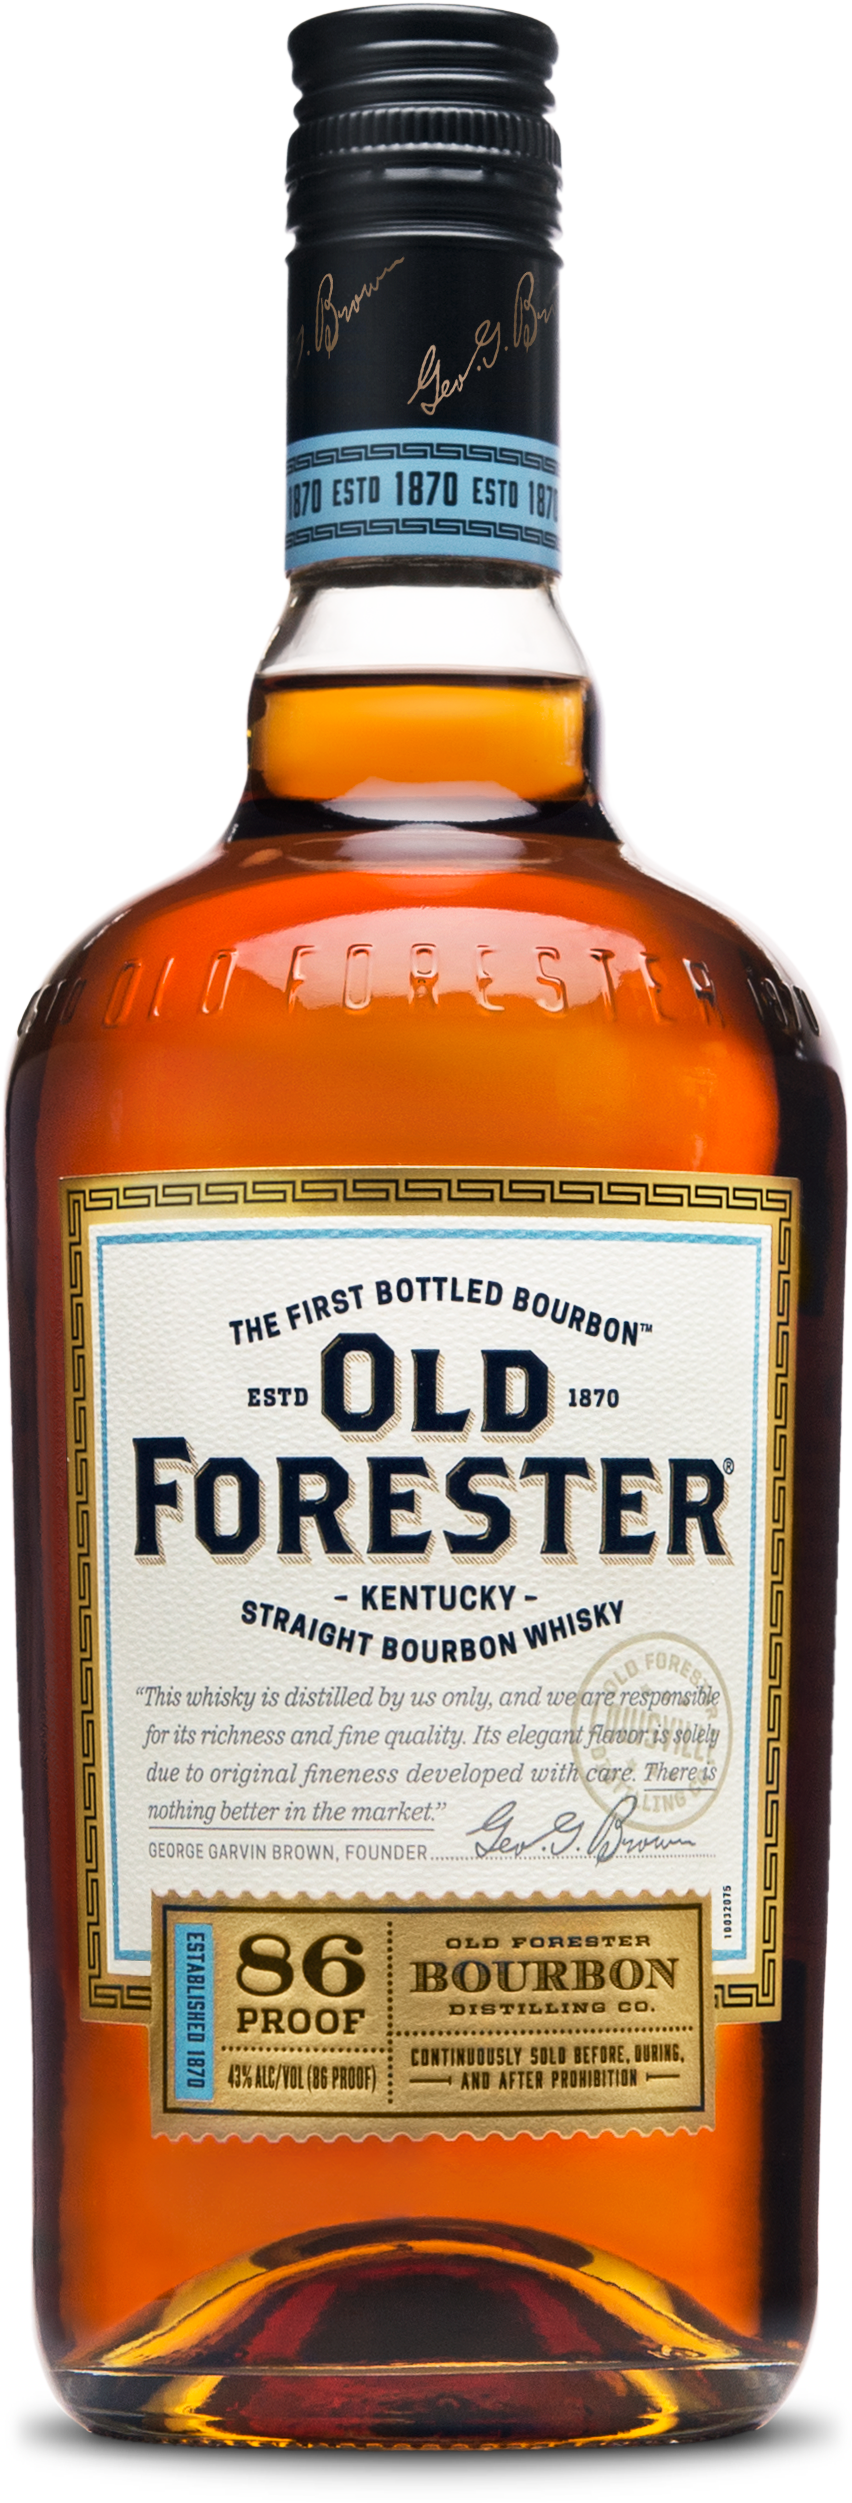 Old Forester Kentucky Straight Bourbon Whisky 86 Proof